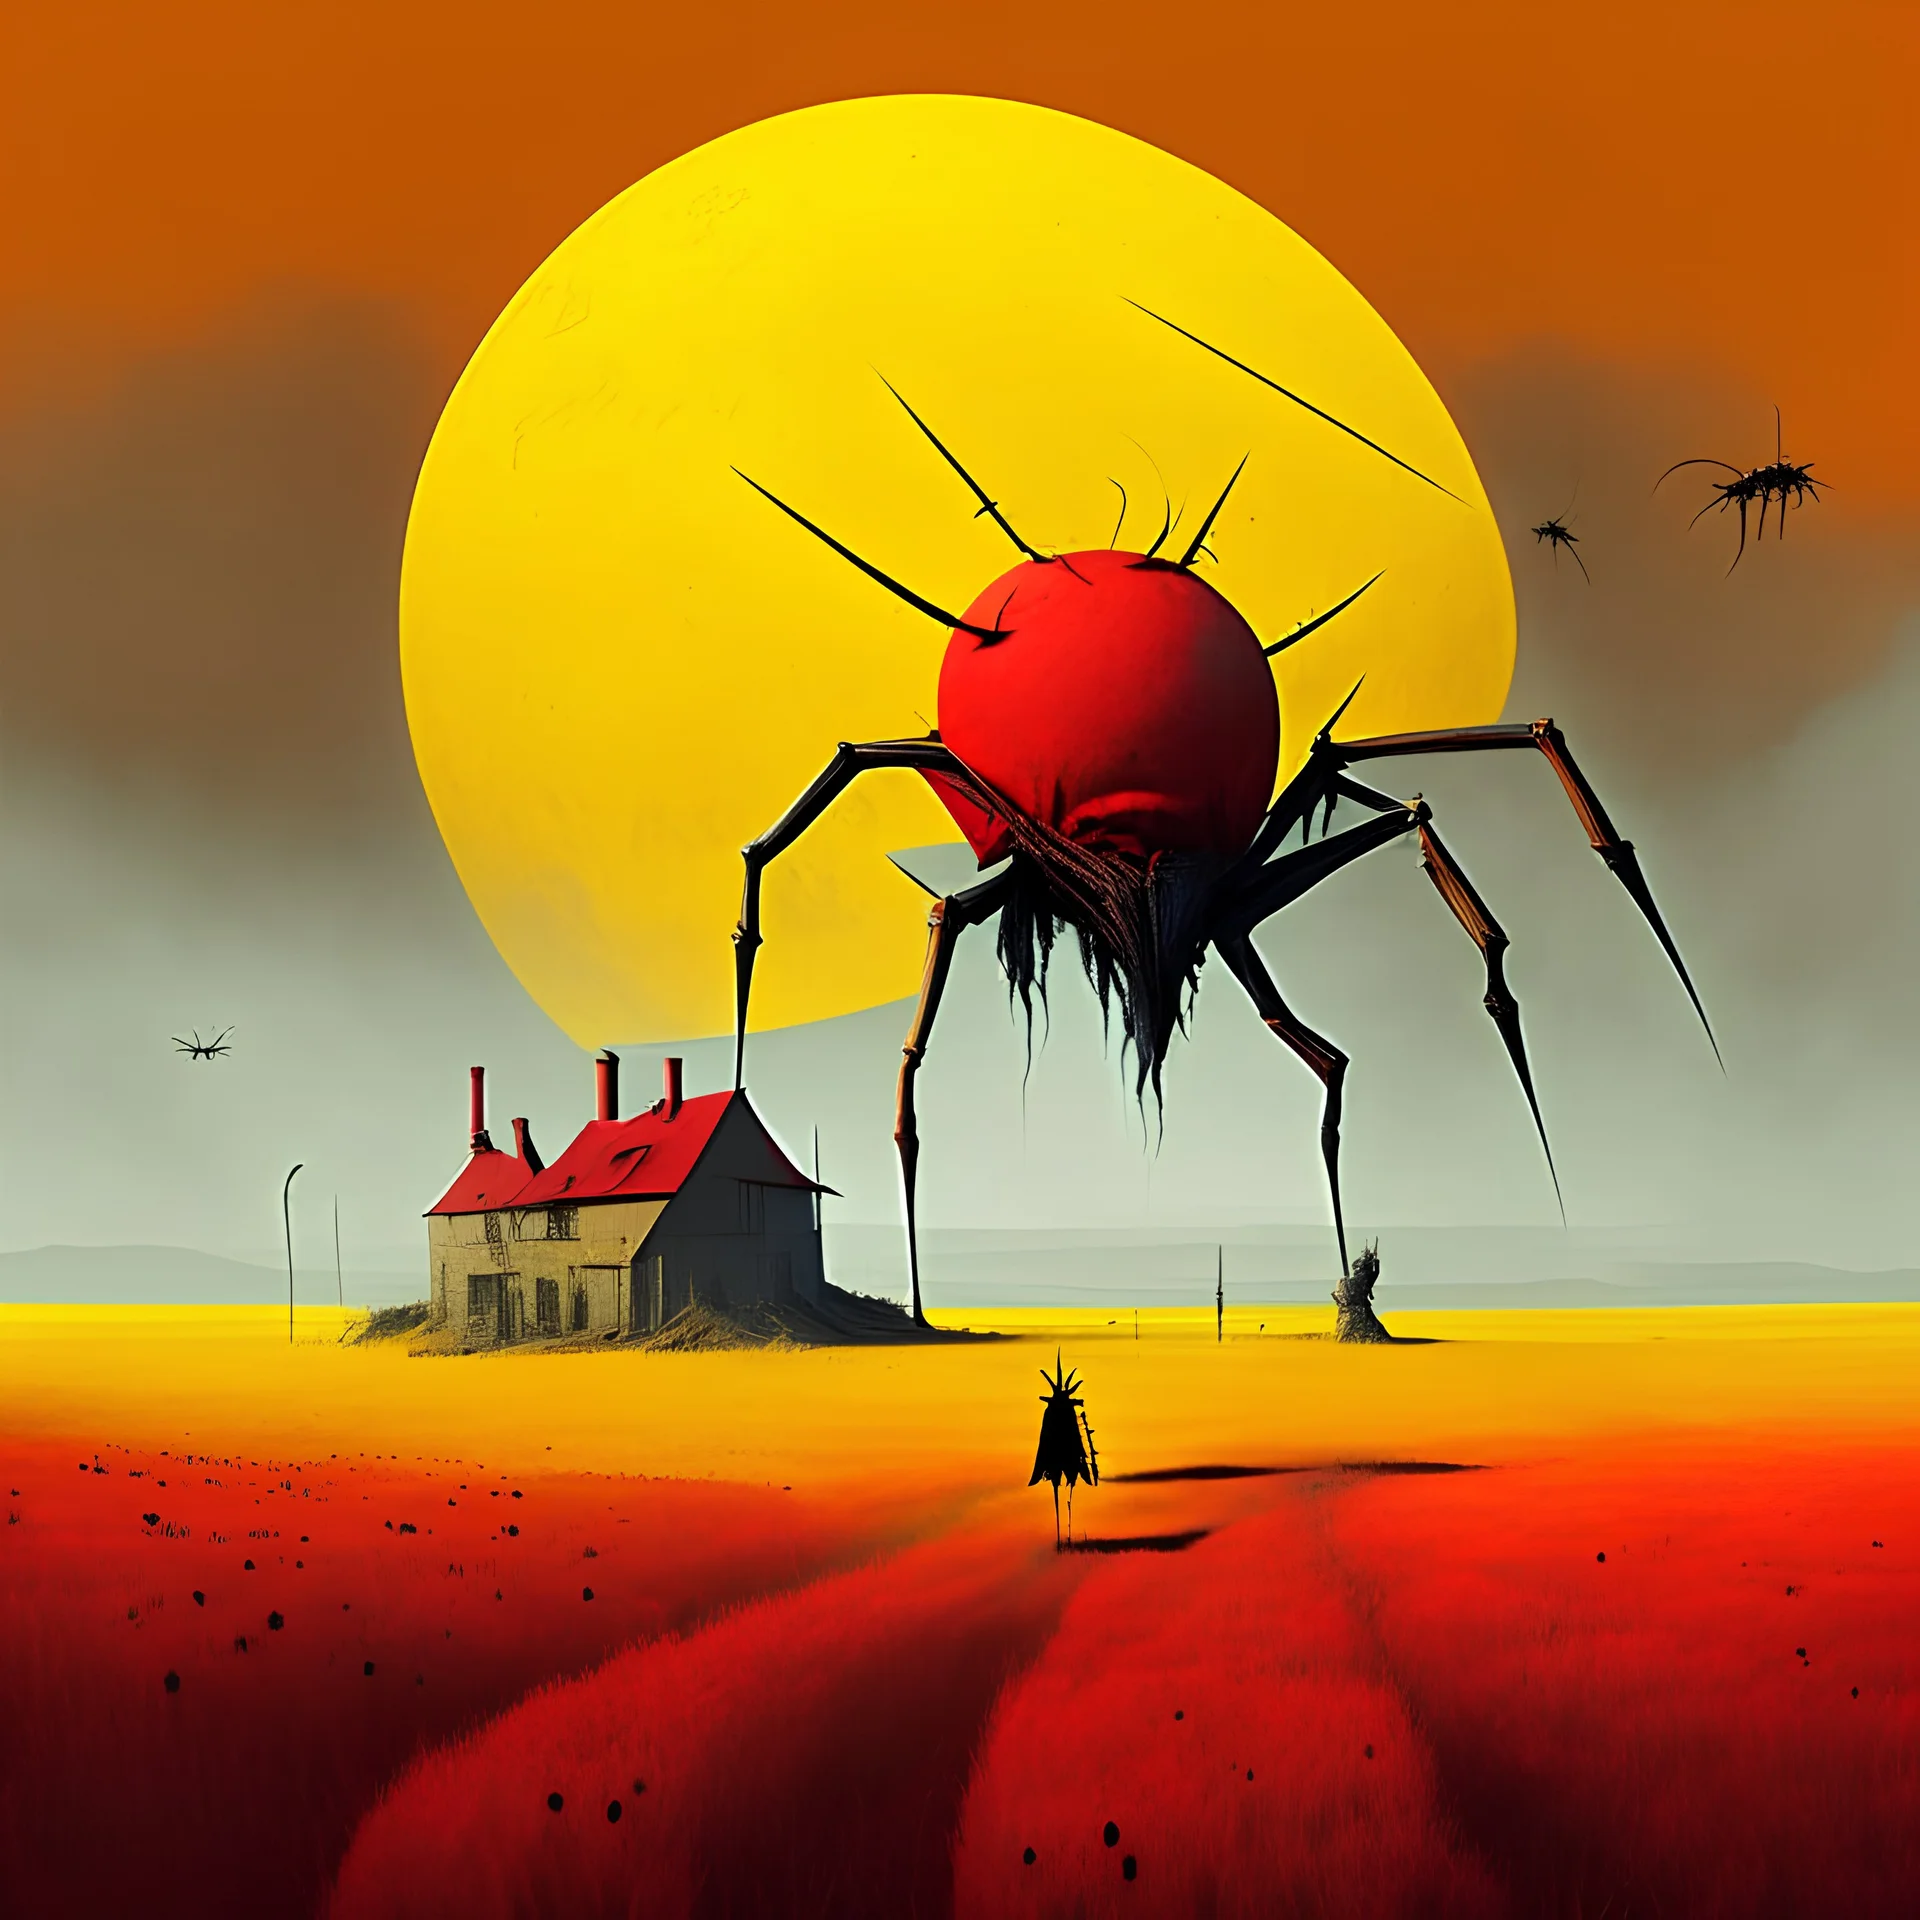 High concept art, dramatic unreal landscape, in a red field with an anthropomorphic yellow house made out of a Lemon skittering away on spider legs, colossal biomechanical Minotaur carrying a reaping Scythe, large moon on horizon, smoke plumes in distance, dynamic composition, oddball masterpiece, sfumato, complex contrast